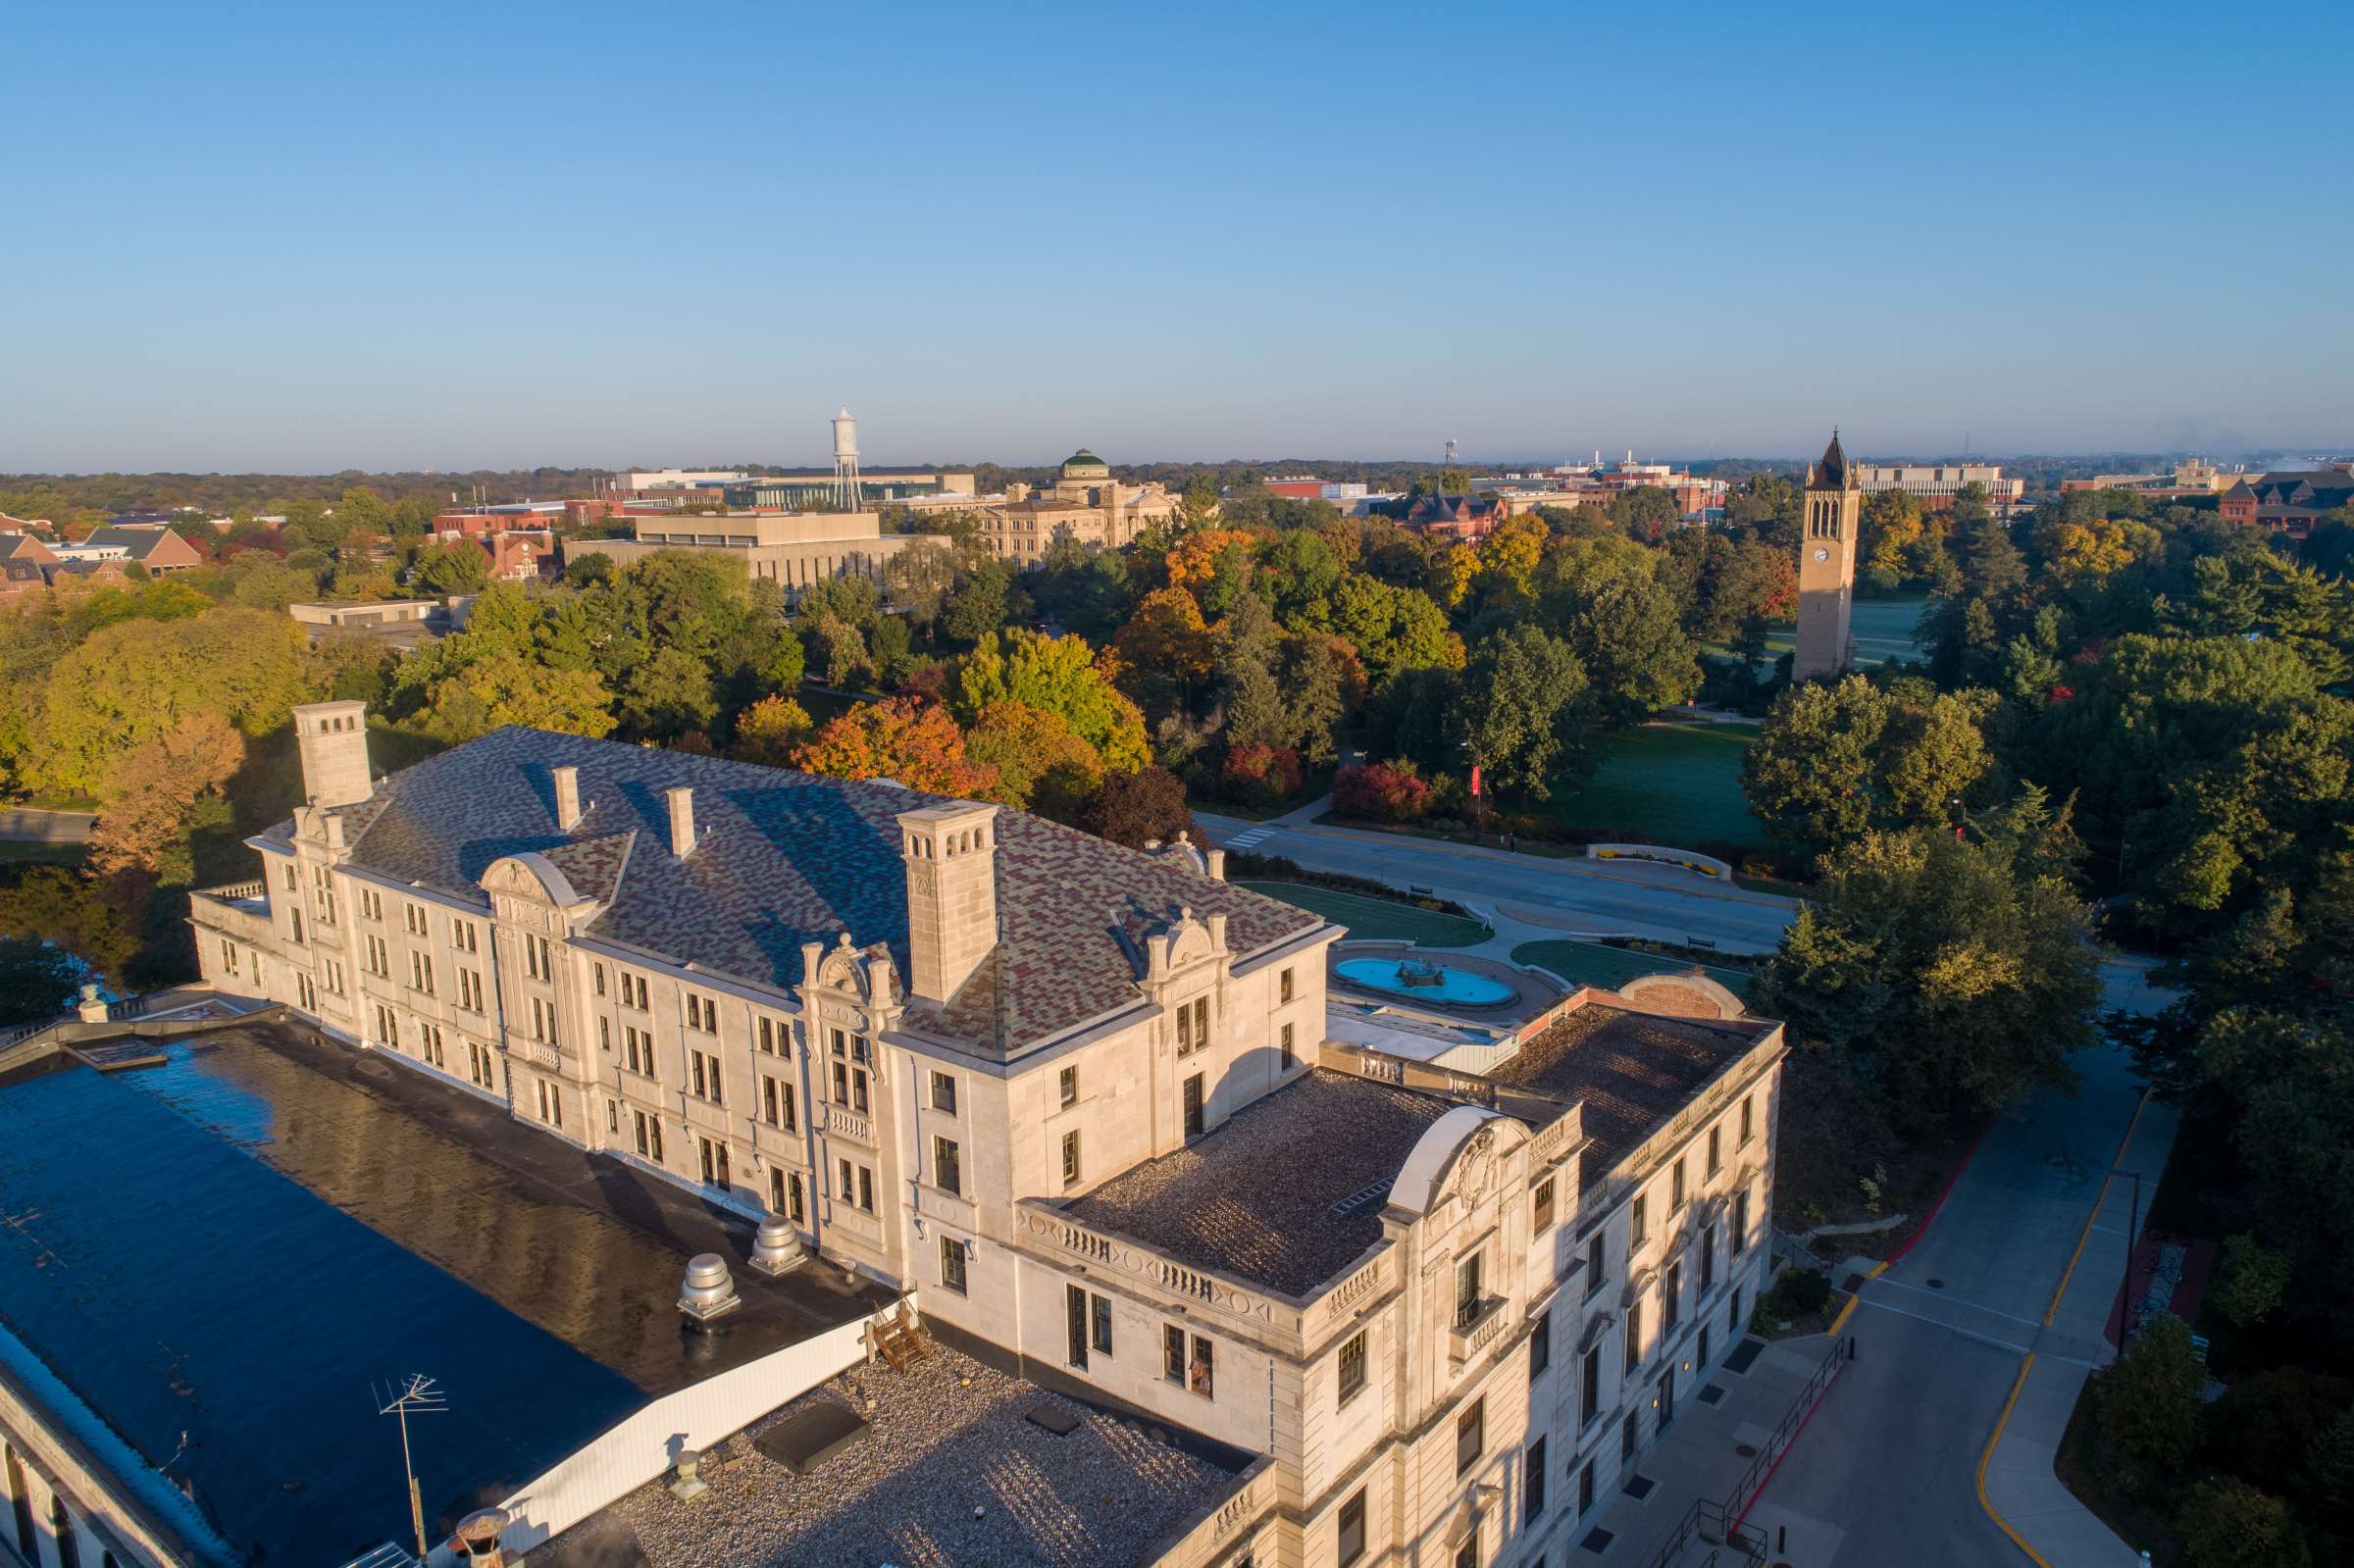 A drone photograph of Iowa State's campus. In view is the Memorial Union, Campanile, and the many trees on campus